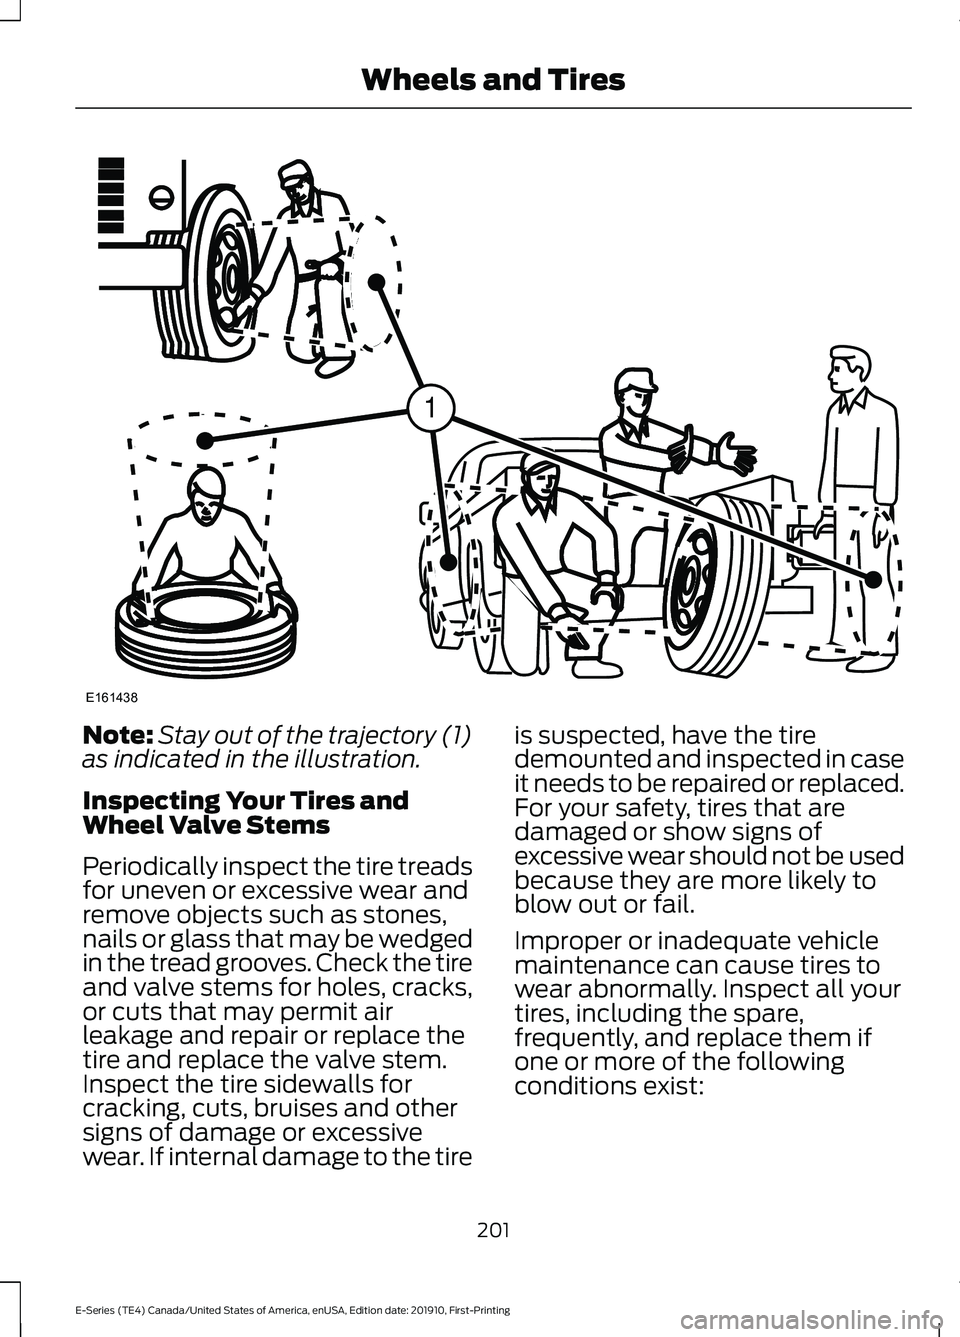 FORD E-350 2021  Owners Manual Note:
Stay out of the trajectory (1)
as indicated in the illustration.
Inspecting Your Tires and
Wheel Valve Stems
Periodically inspect the tire treads
for uneven or excessive wear and
remove objects 